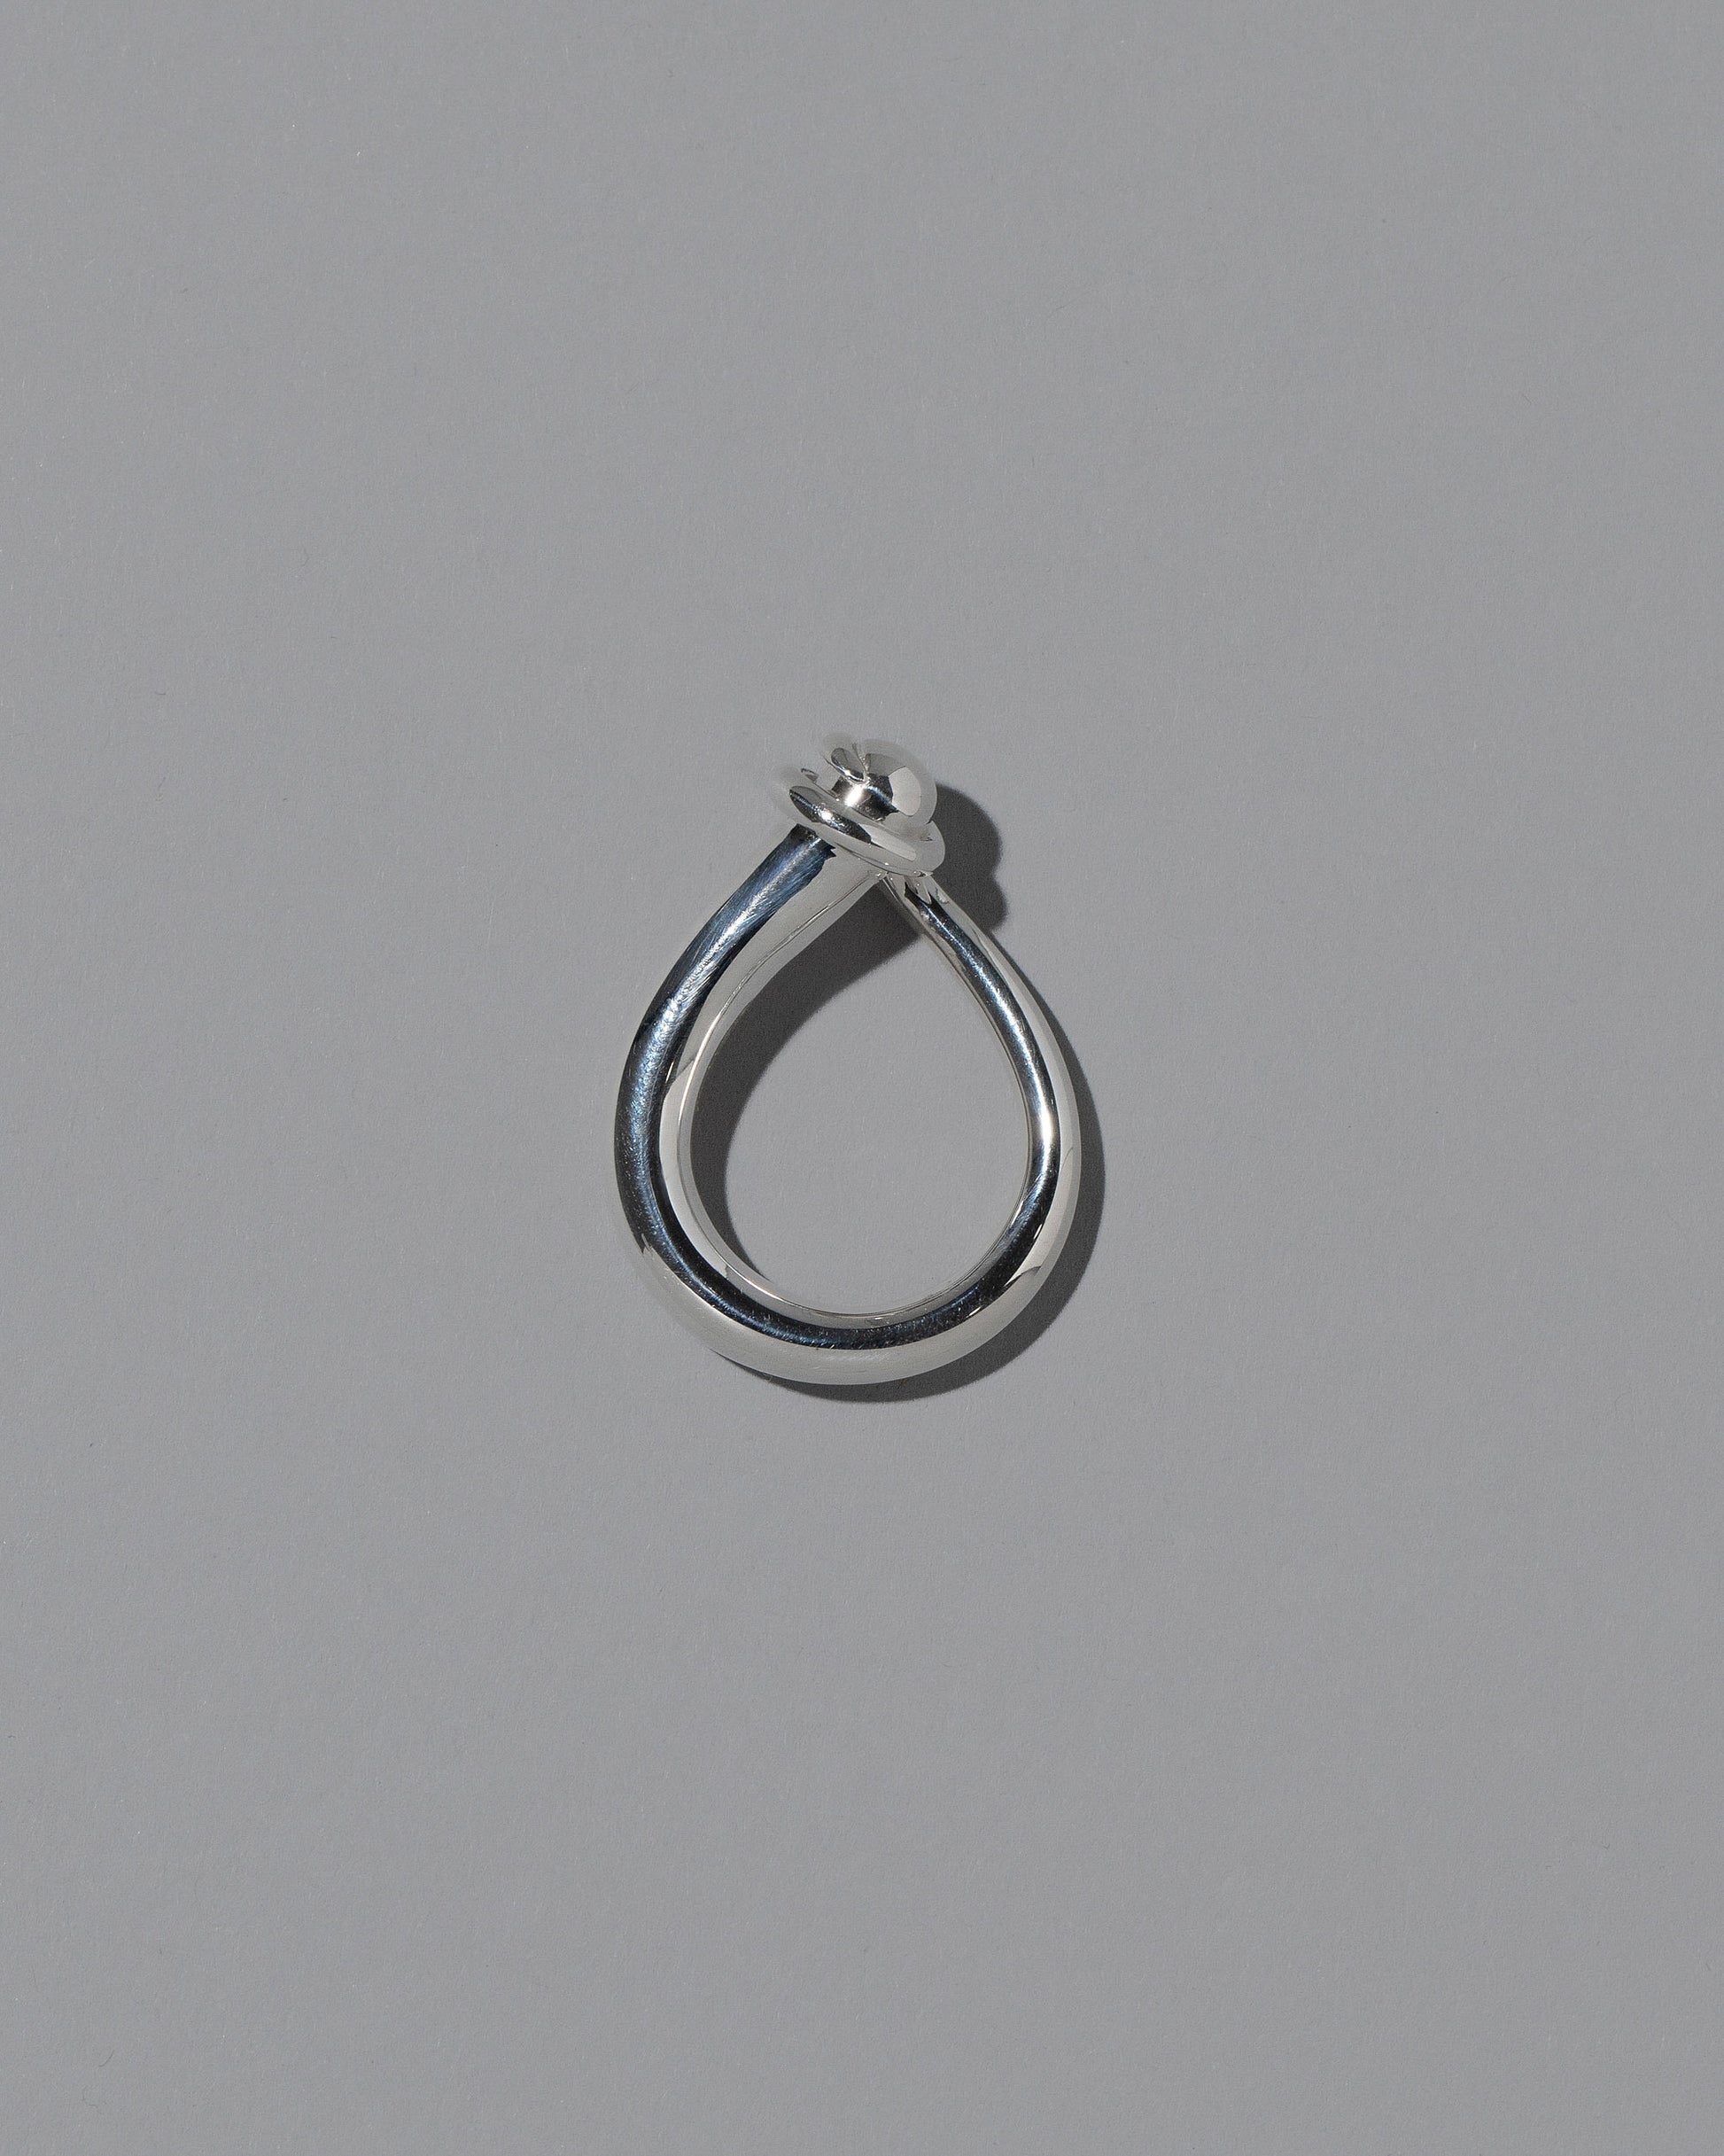 View from the side of the CRZM Sterling Silver Boulder Ring on light color background.